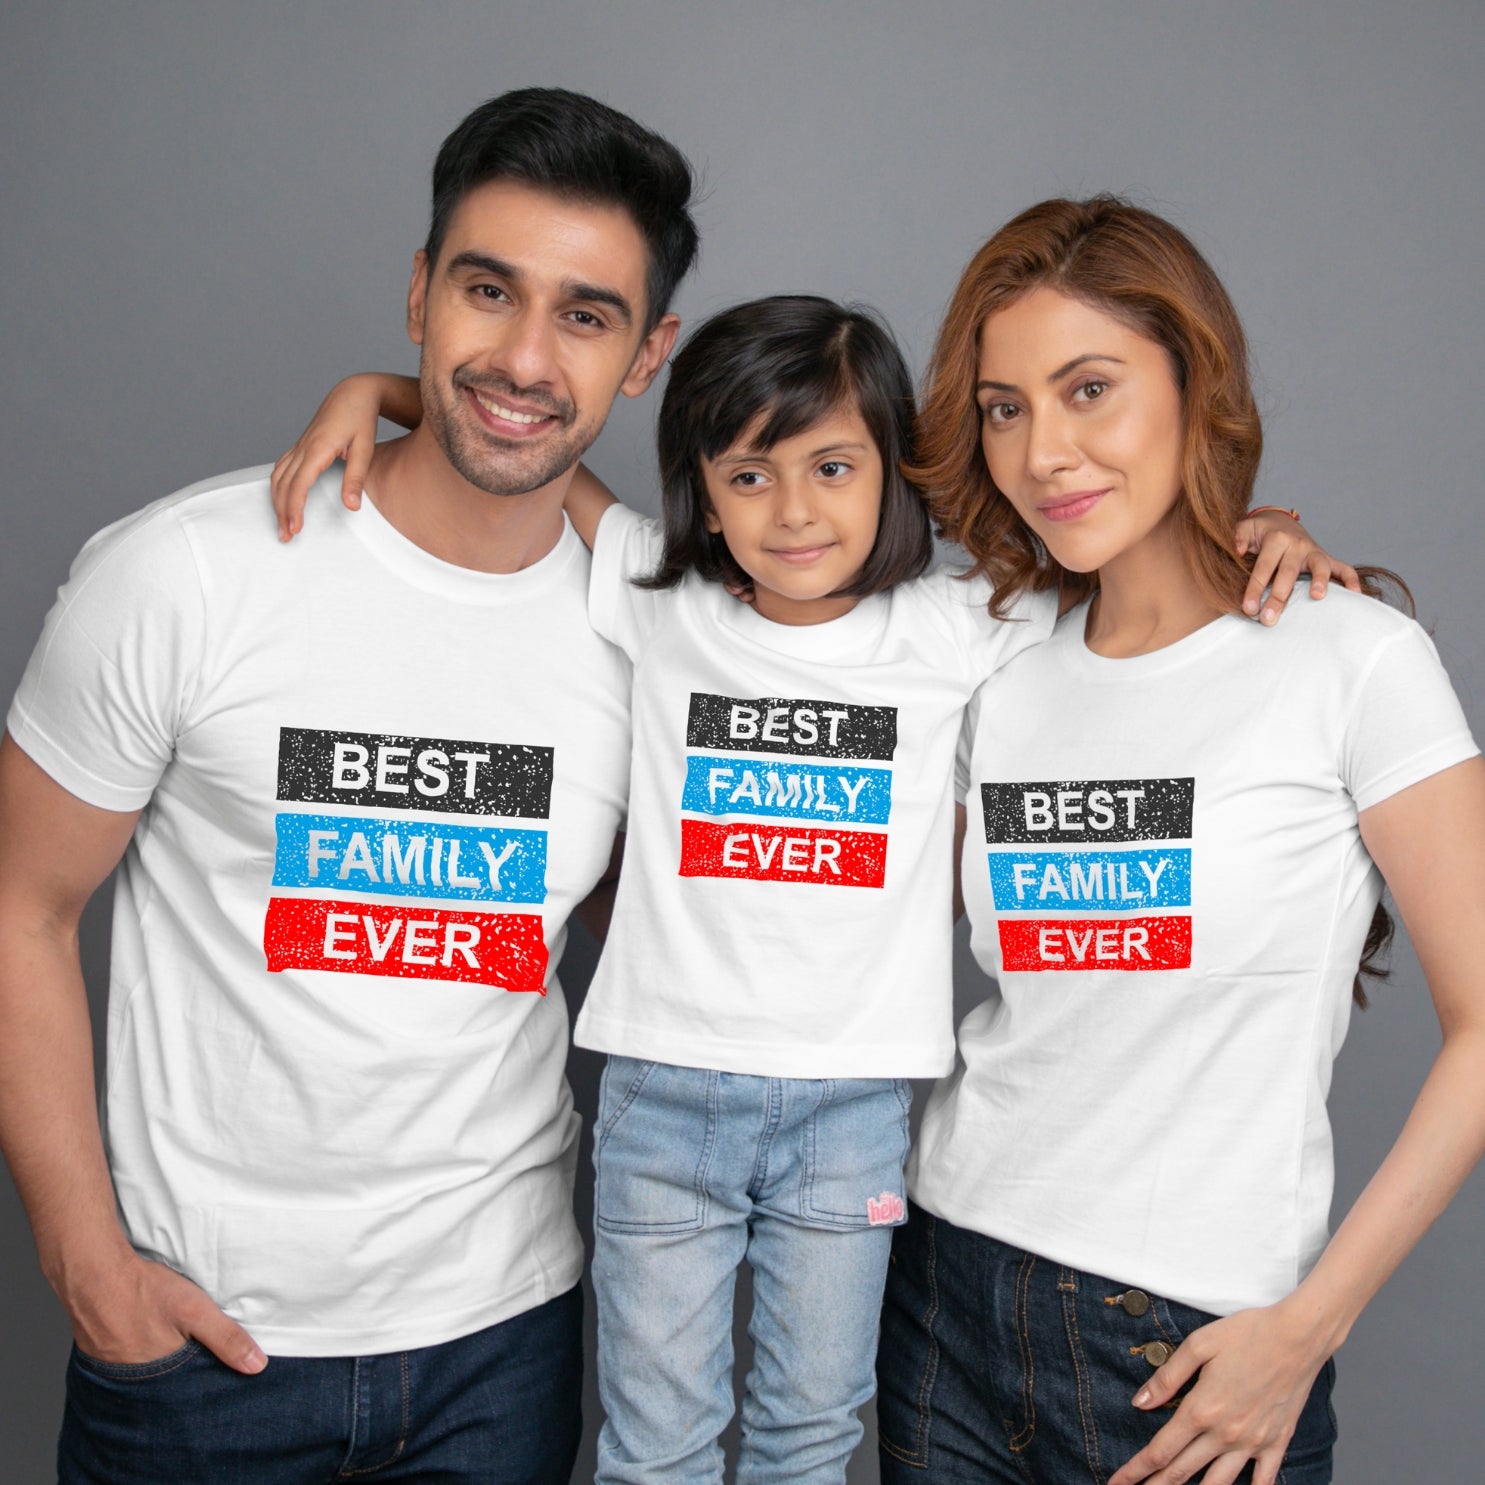 Family t shirt set of 3 Mom Dad Daughter in White  Colour - Best Family Ever Variant